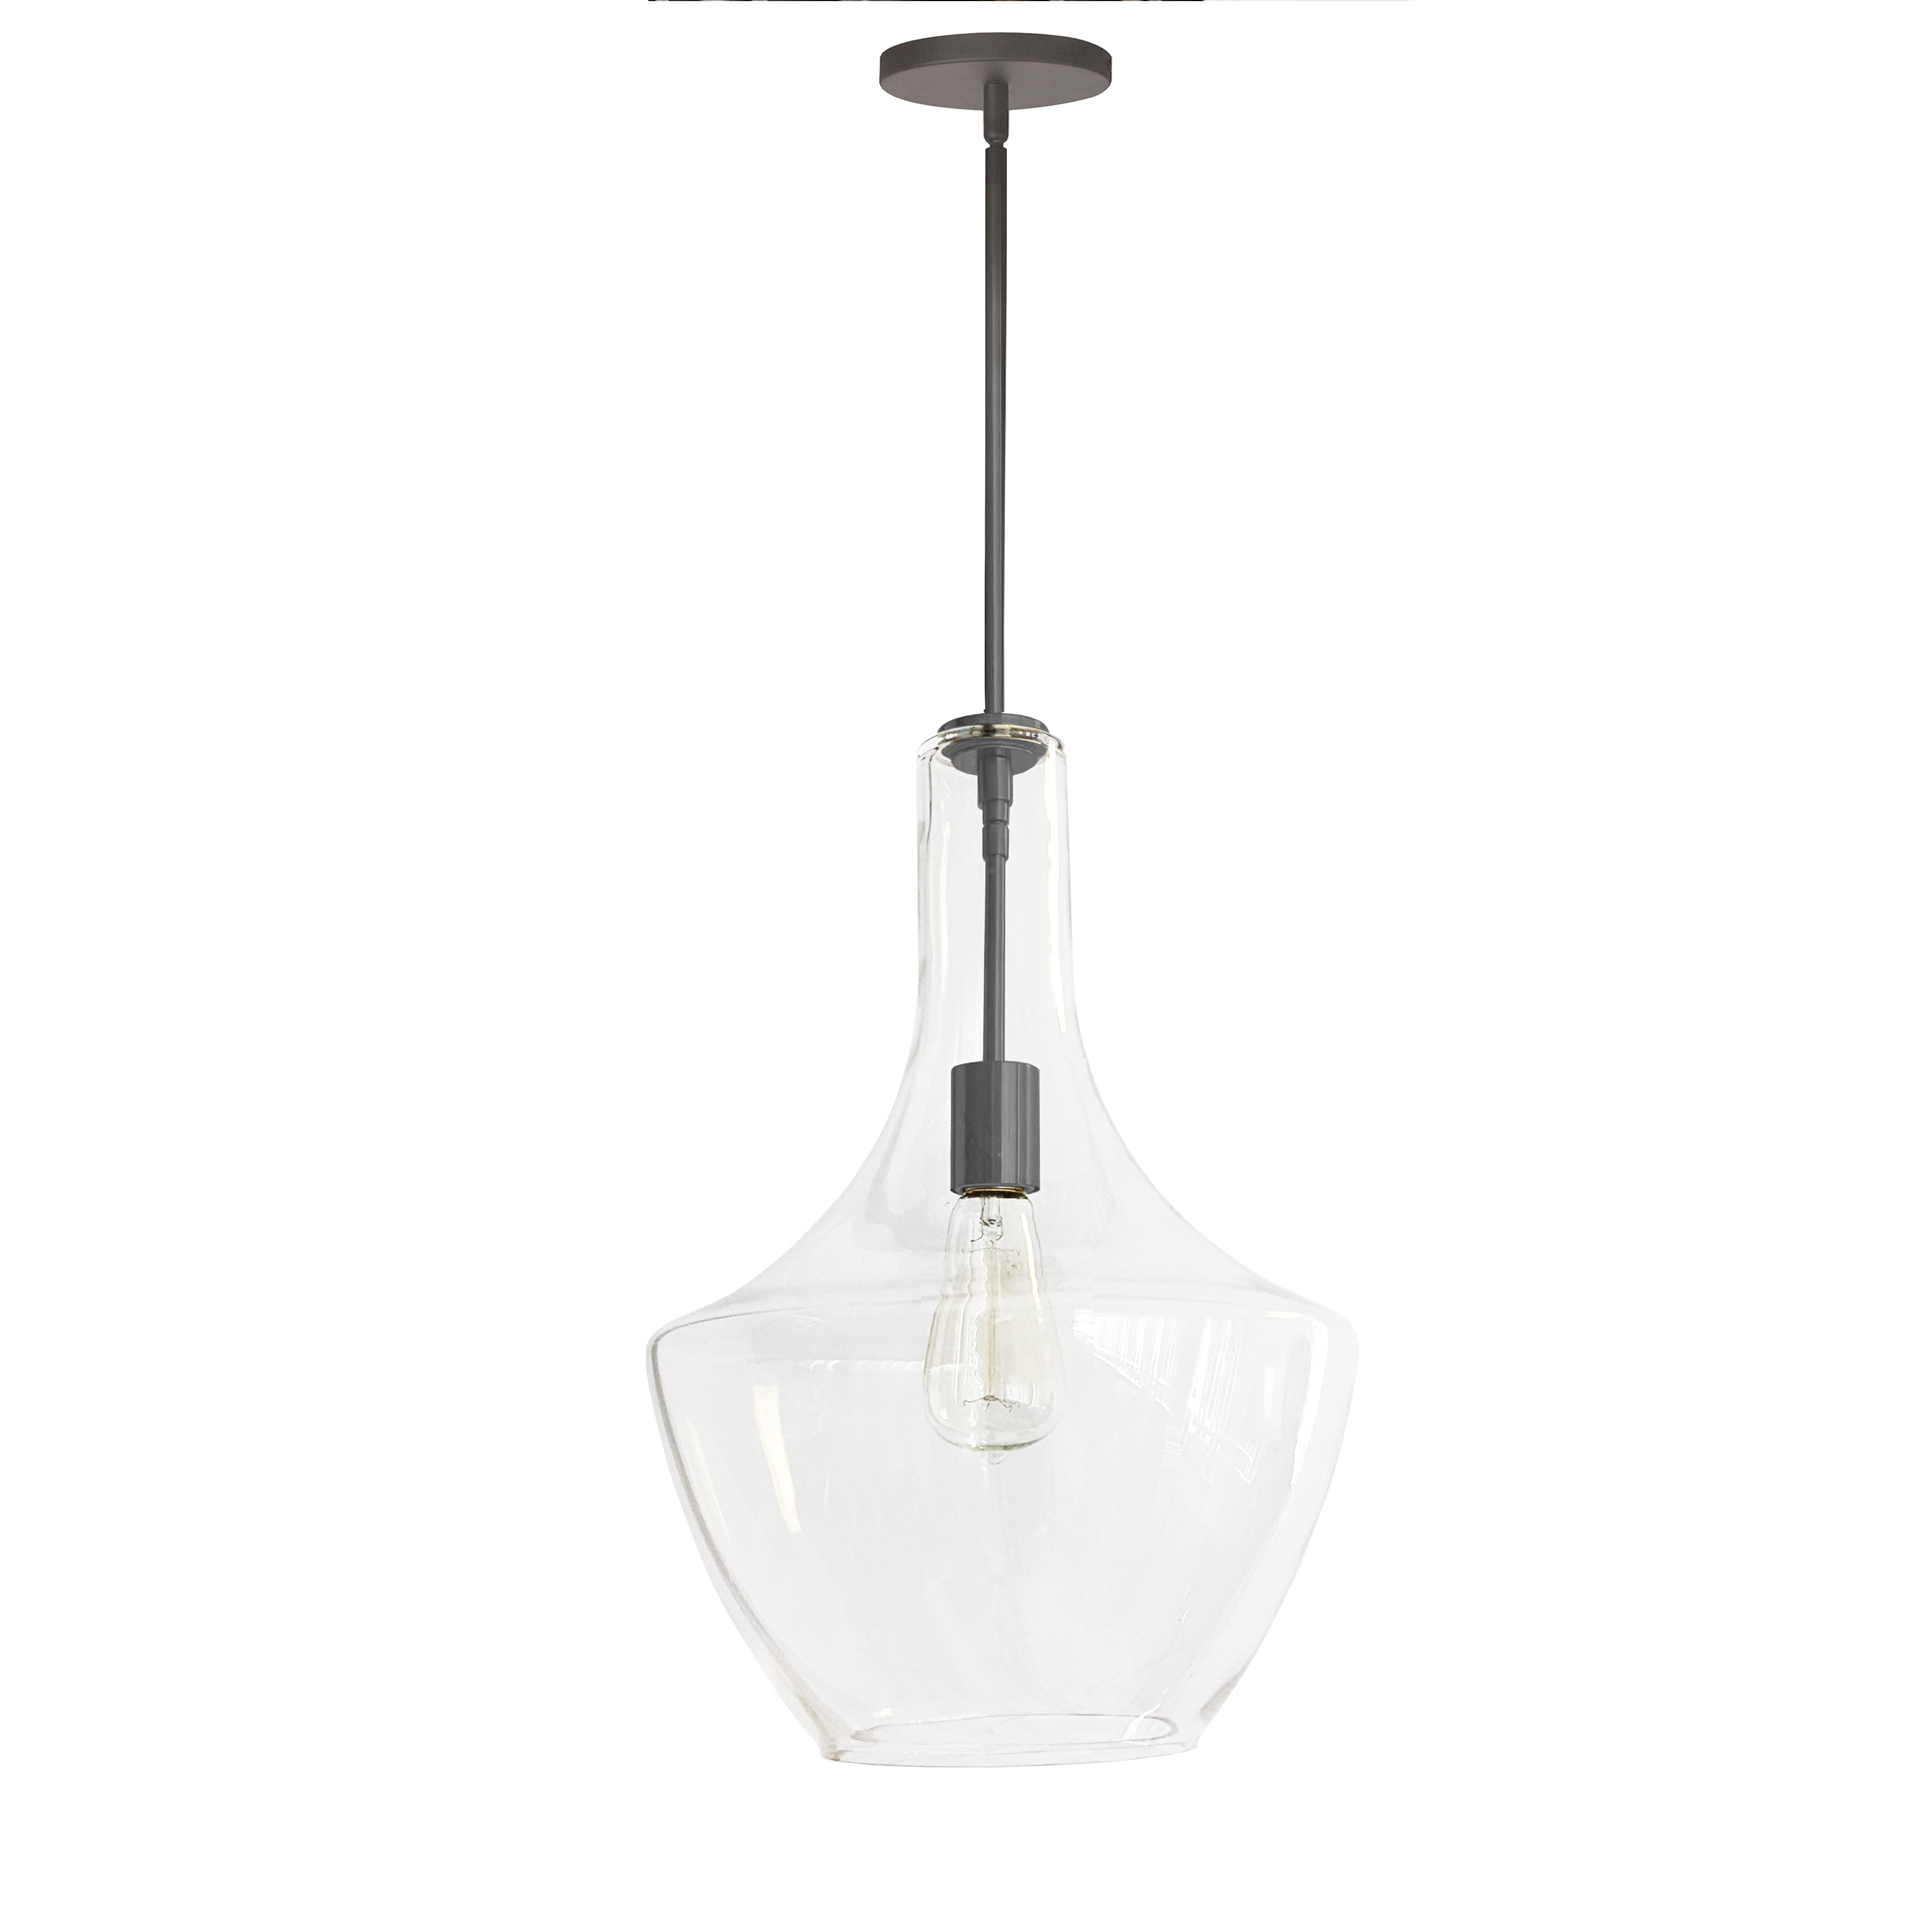 While its graceful lines may evoke the designs of yesteryear, the Petalite family of lighting features a thoroughly contemporary edge. It's the combination of modern minimalism and generous curves that create its unique appeal. A modest metal frame drops into a glass housing in a lyrical curved shape reminiscent of traditional lanterns. The effect is stylish, and will provide bright illumination. Petalite lighting has a sensual silhouette that will enhance your living room, kitchen or foyer.